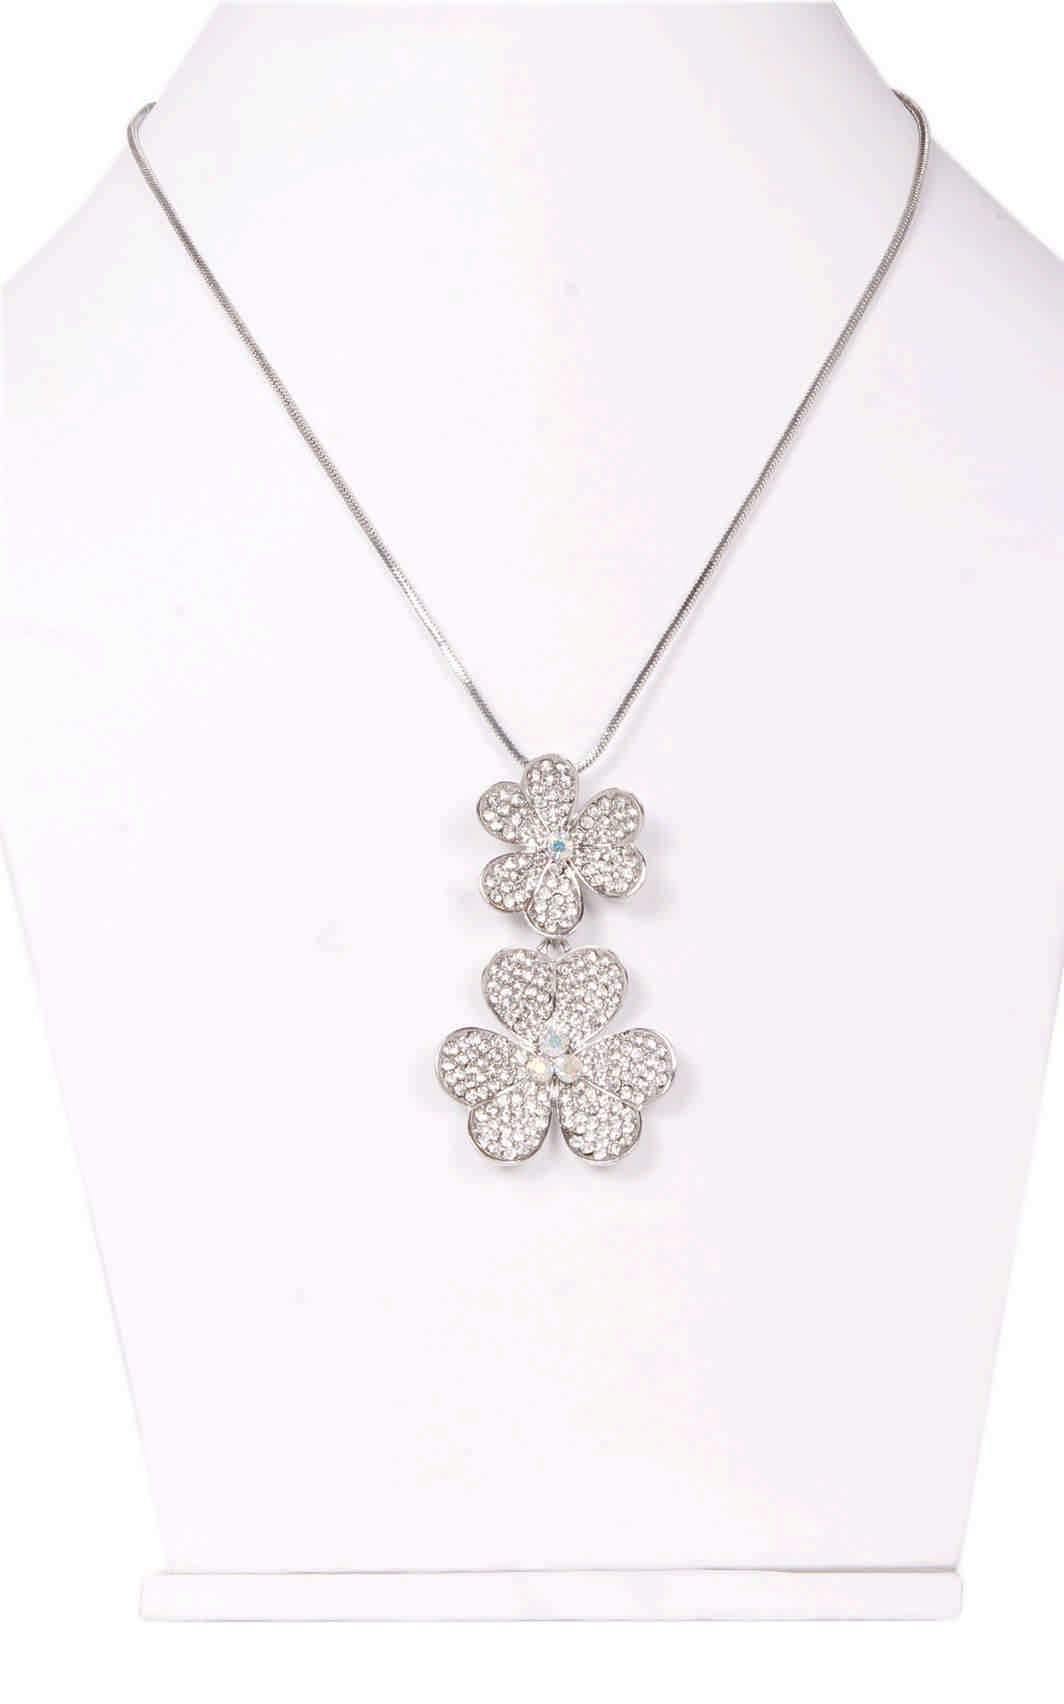 Rhinestones Studded Clover Leaf Design Imitation Fashion Metal Pendant with Long Chain for Girls